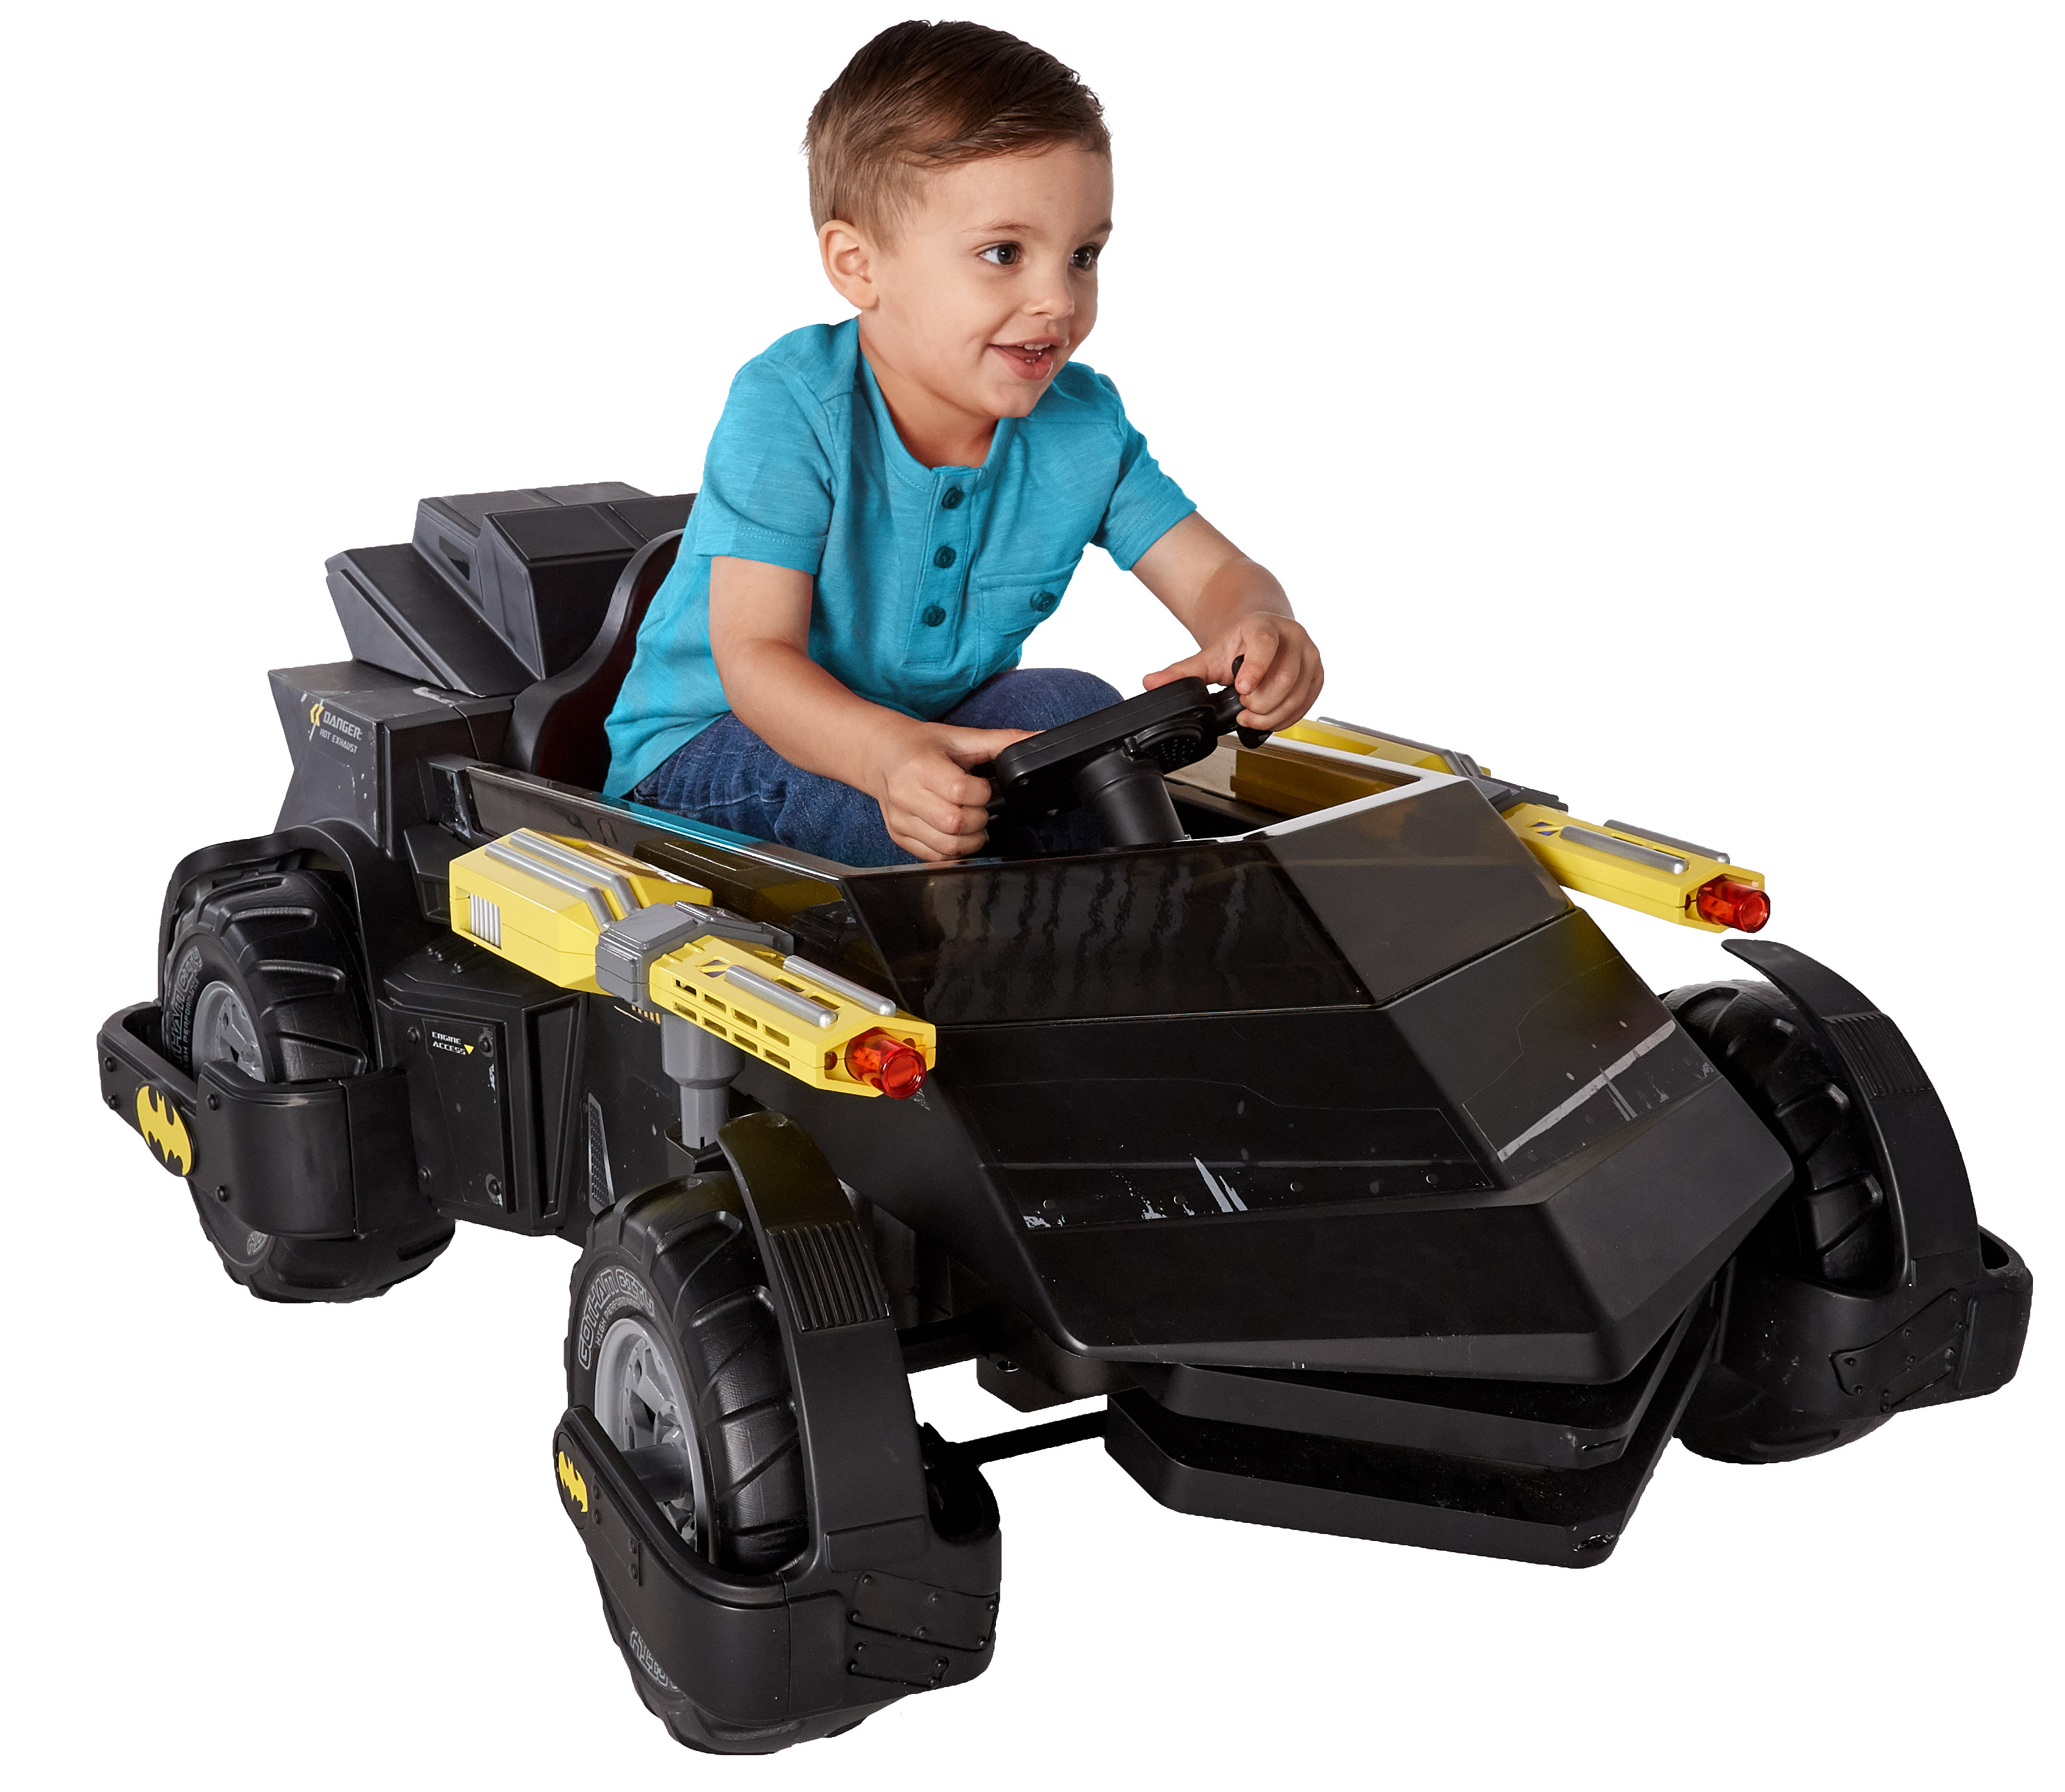 6 Volt DC Comics Batman Batmobile Battery Powered Ride-on - Features Light up Cannons and Sounds! - image 1 of 12